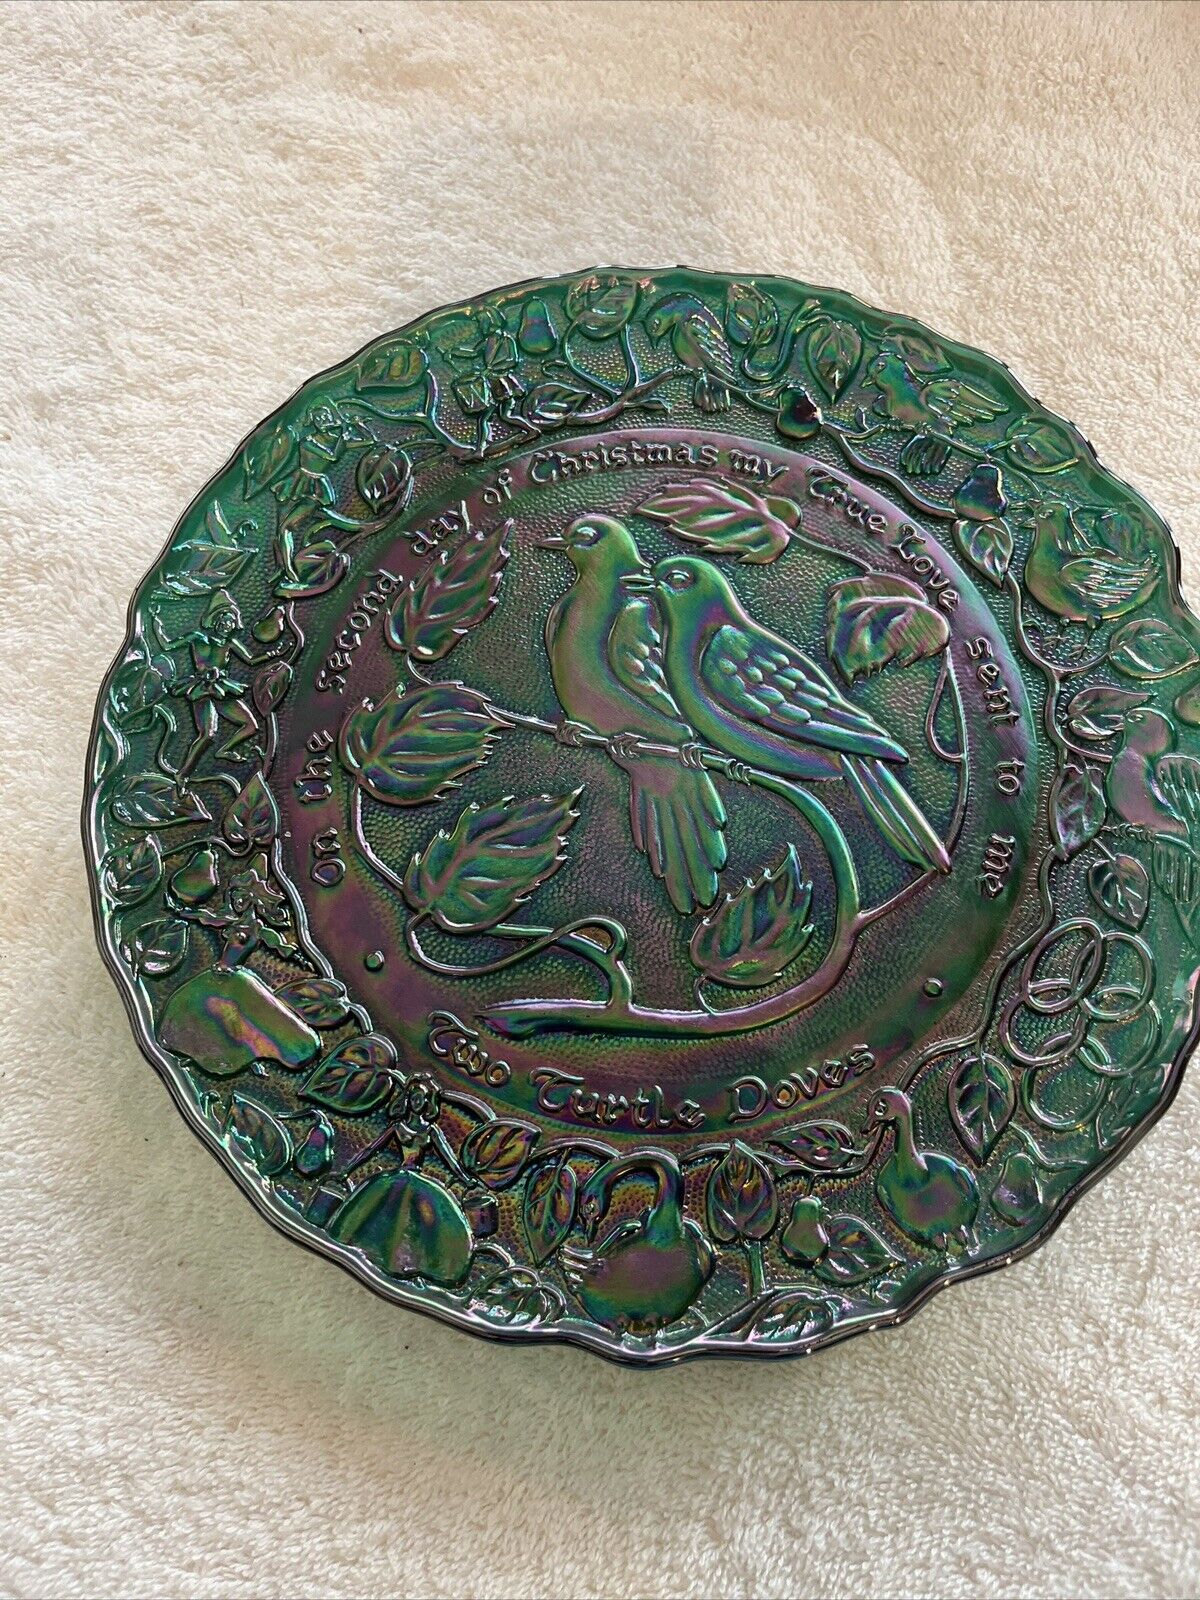 Vtg Imperial Iridescent carnival glass 9 inch plate 2 turtle doves , Christmas